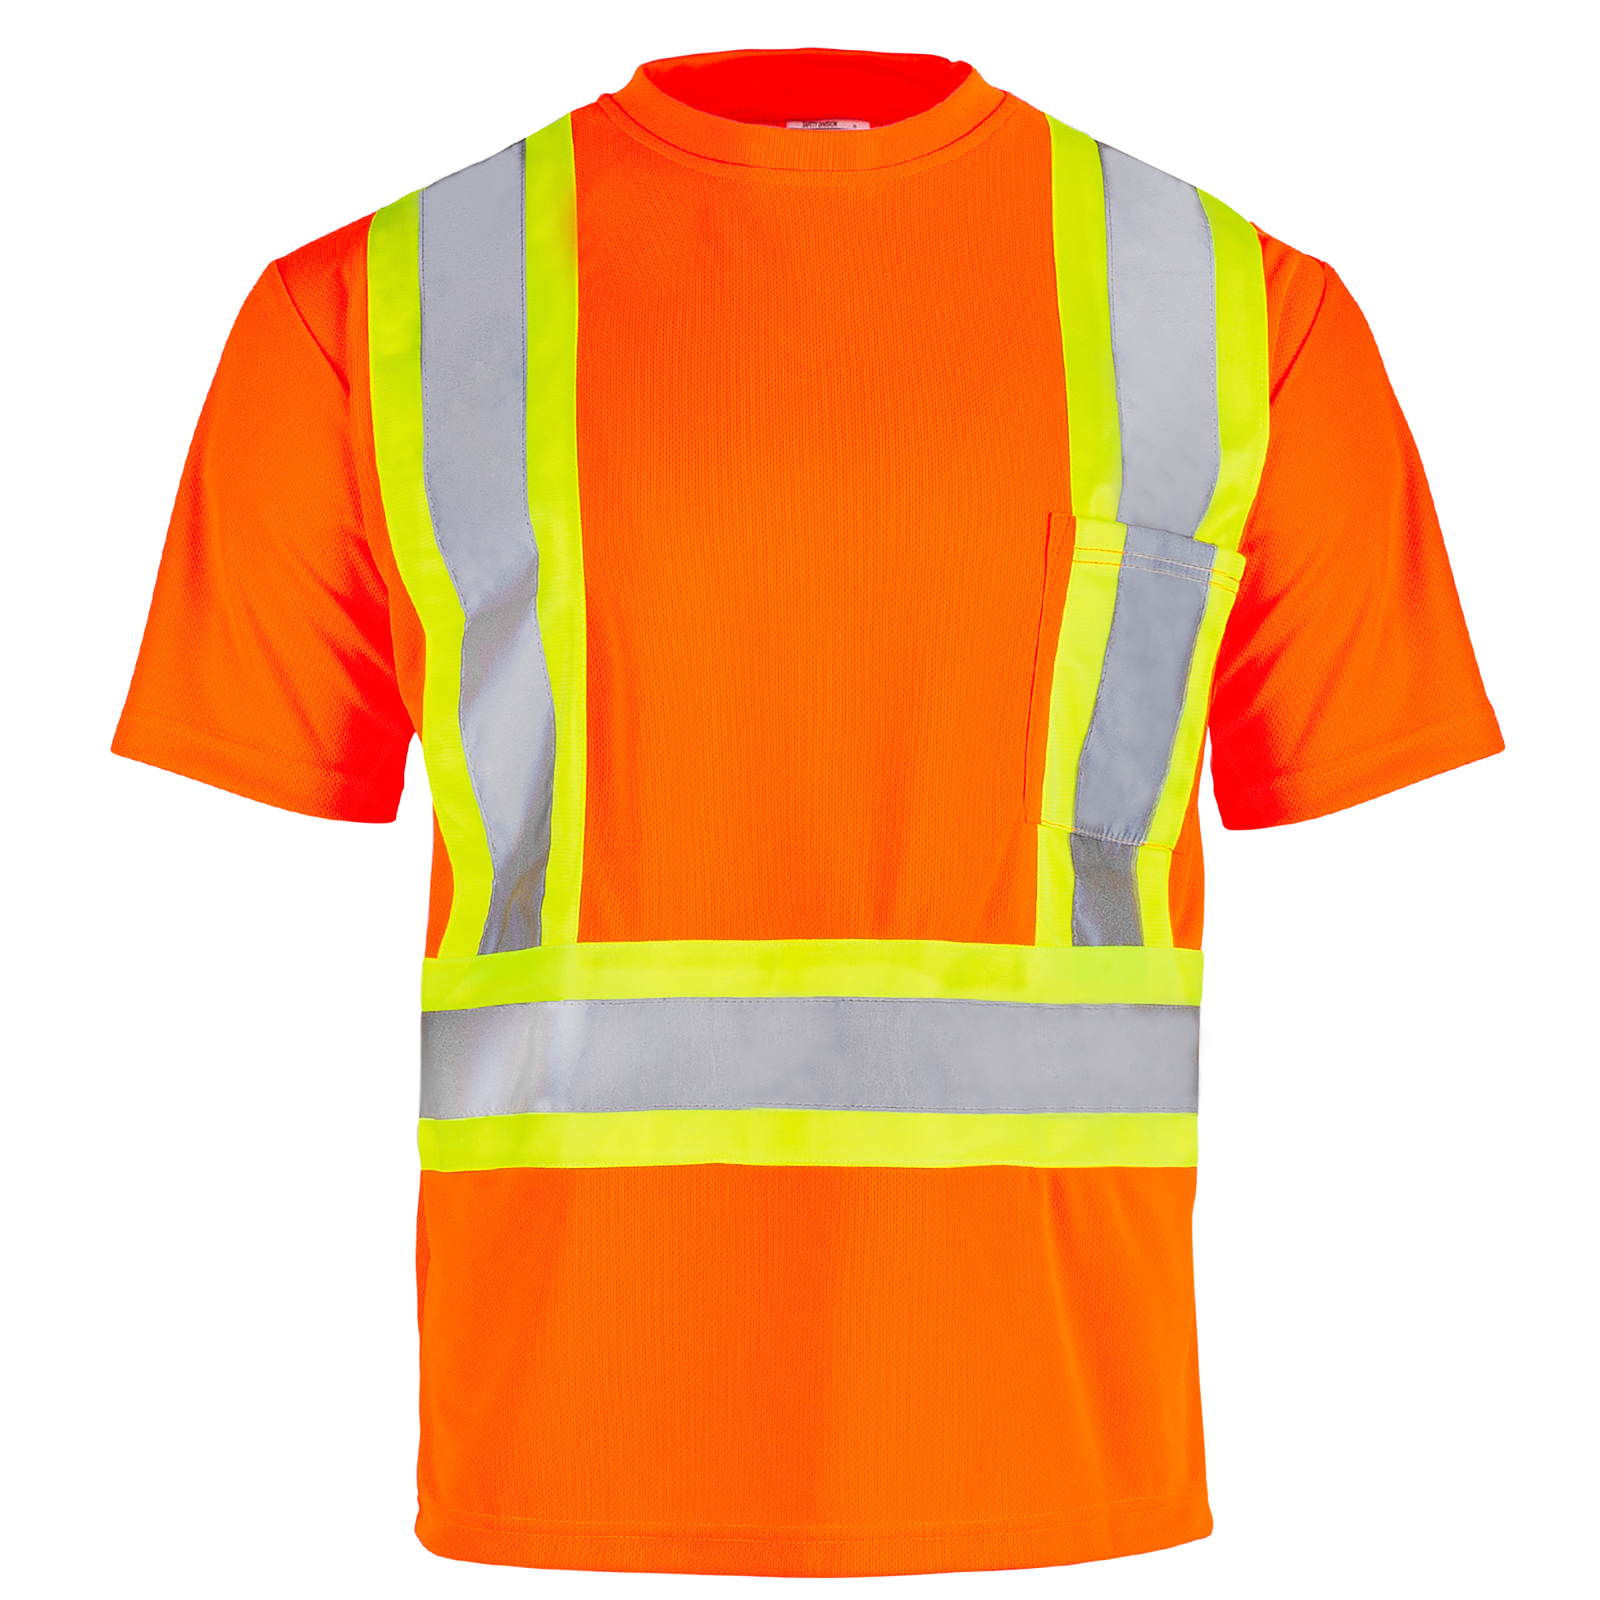 Front view of a Hi-vis reflective two tone safety orange yellow pocket shirt 